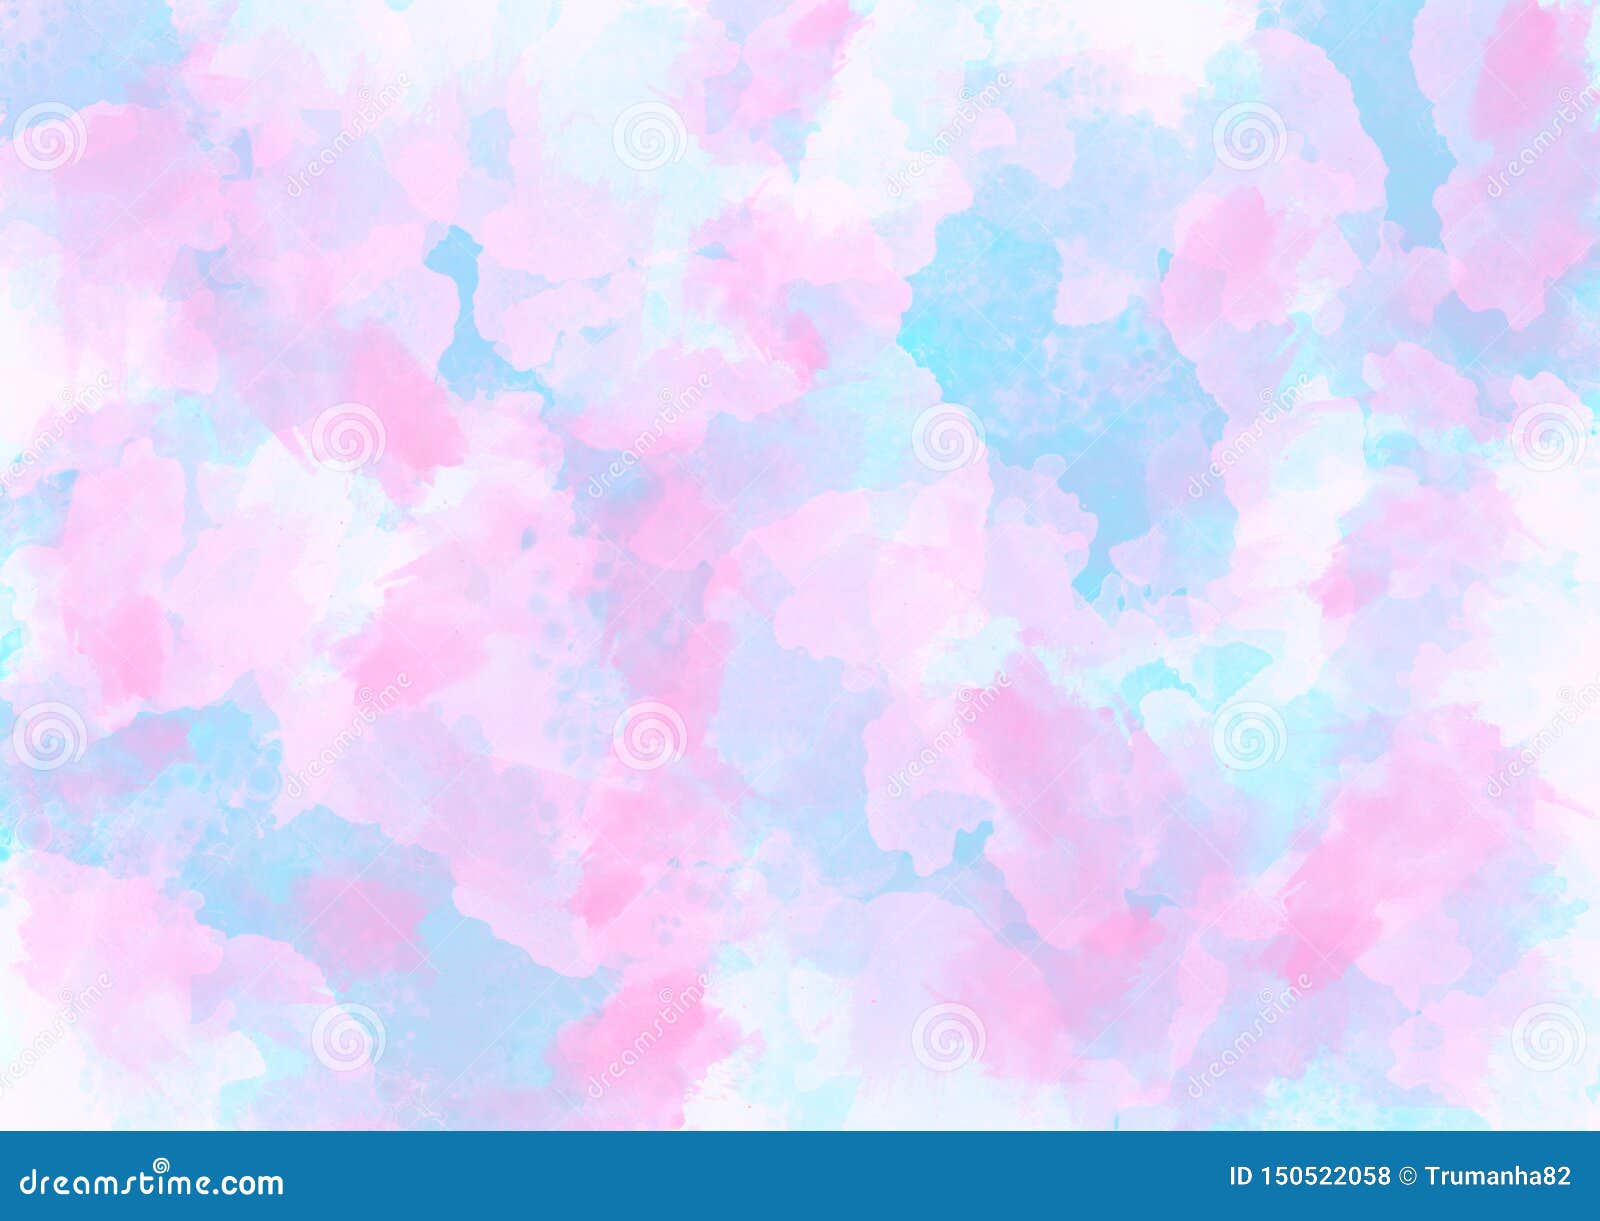 Pink and Blue Watercolor Texture Abstract Background Stock Photo - Image of  artwork, cover: 150522058